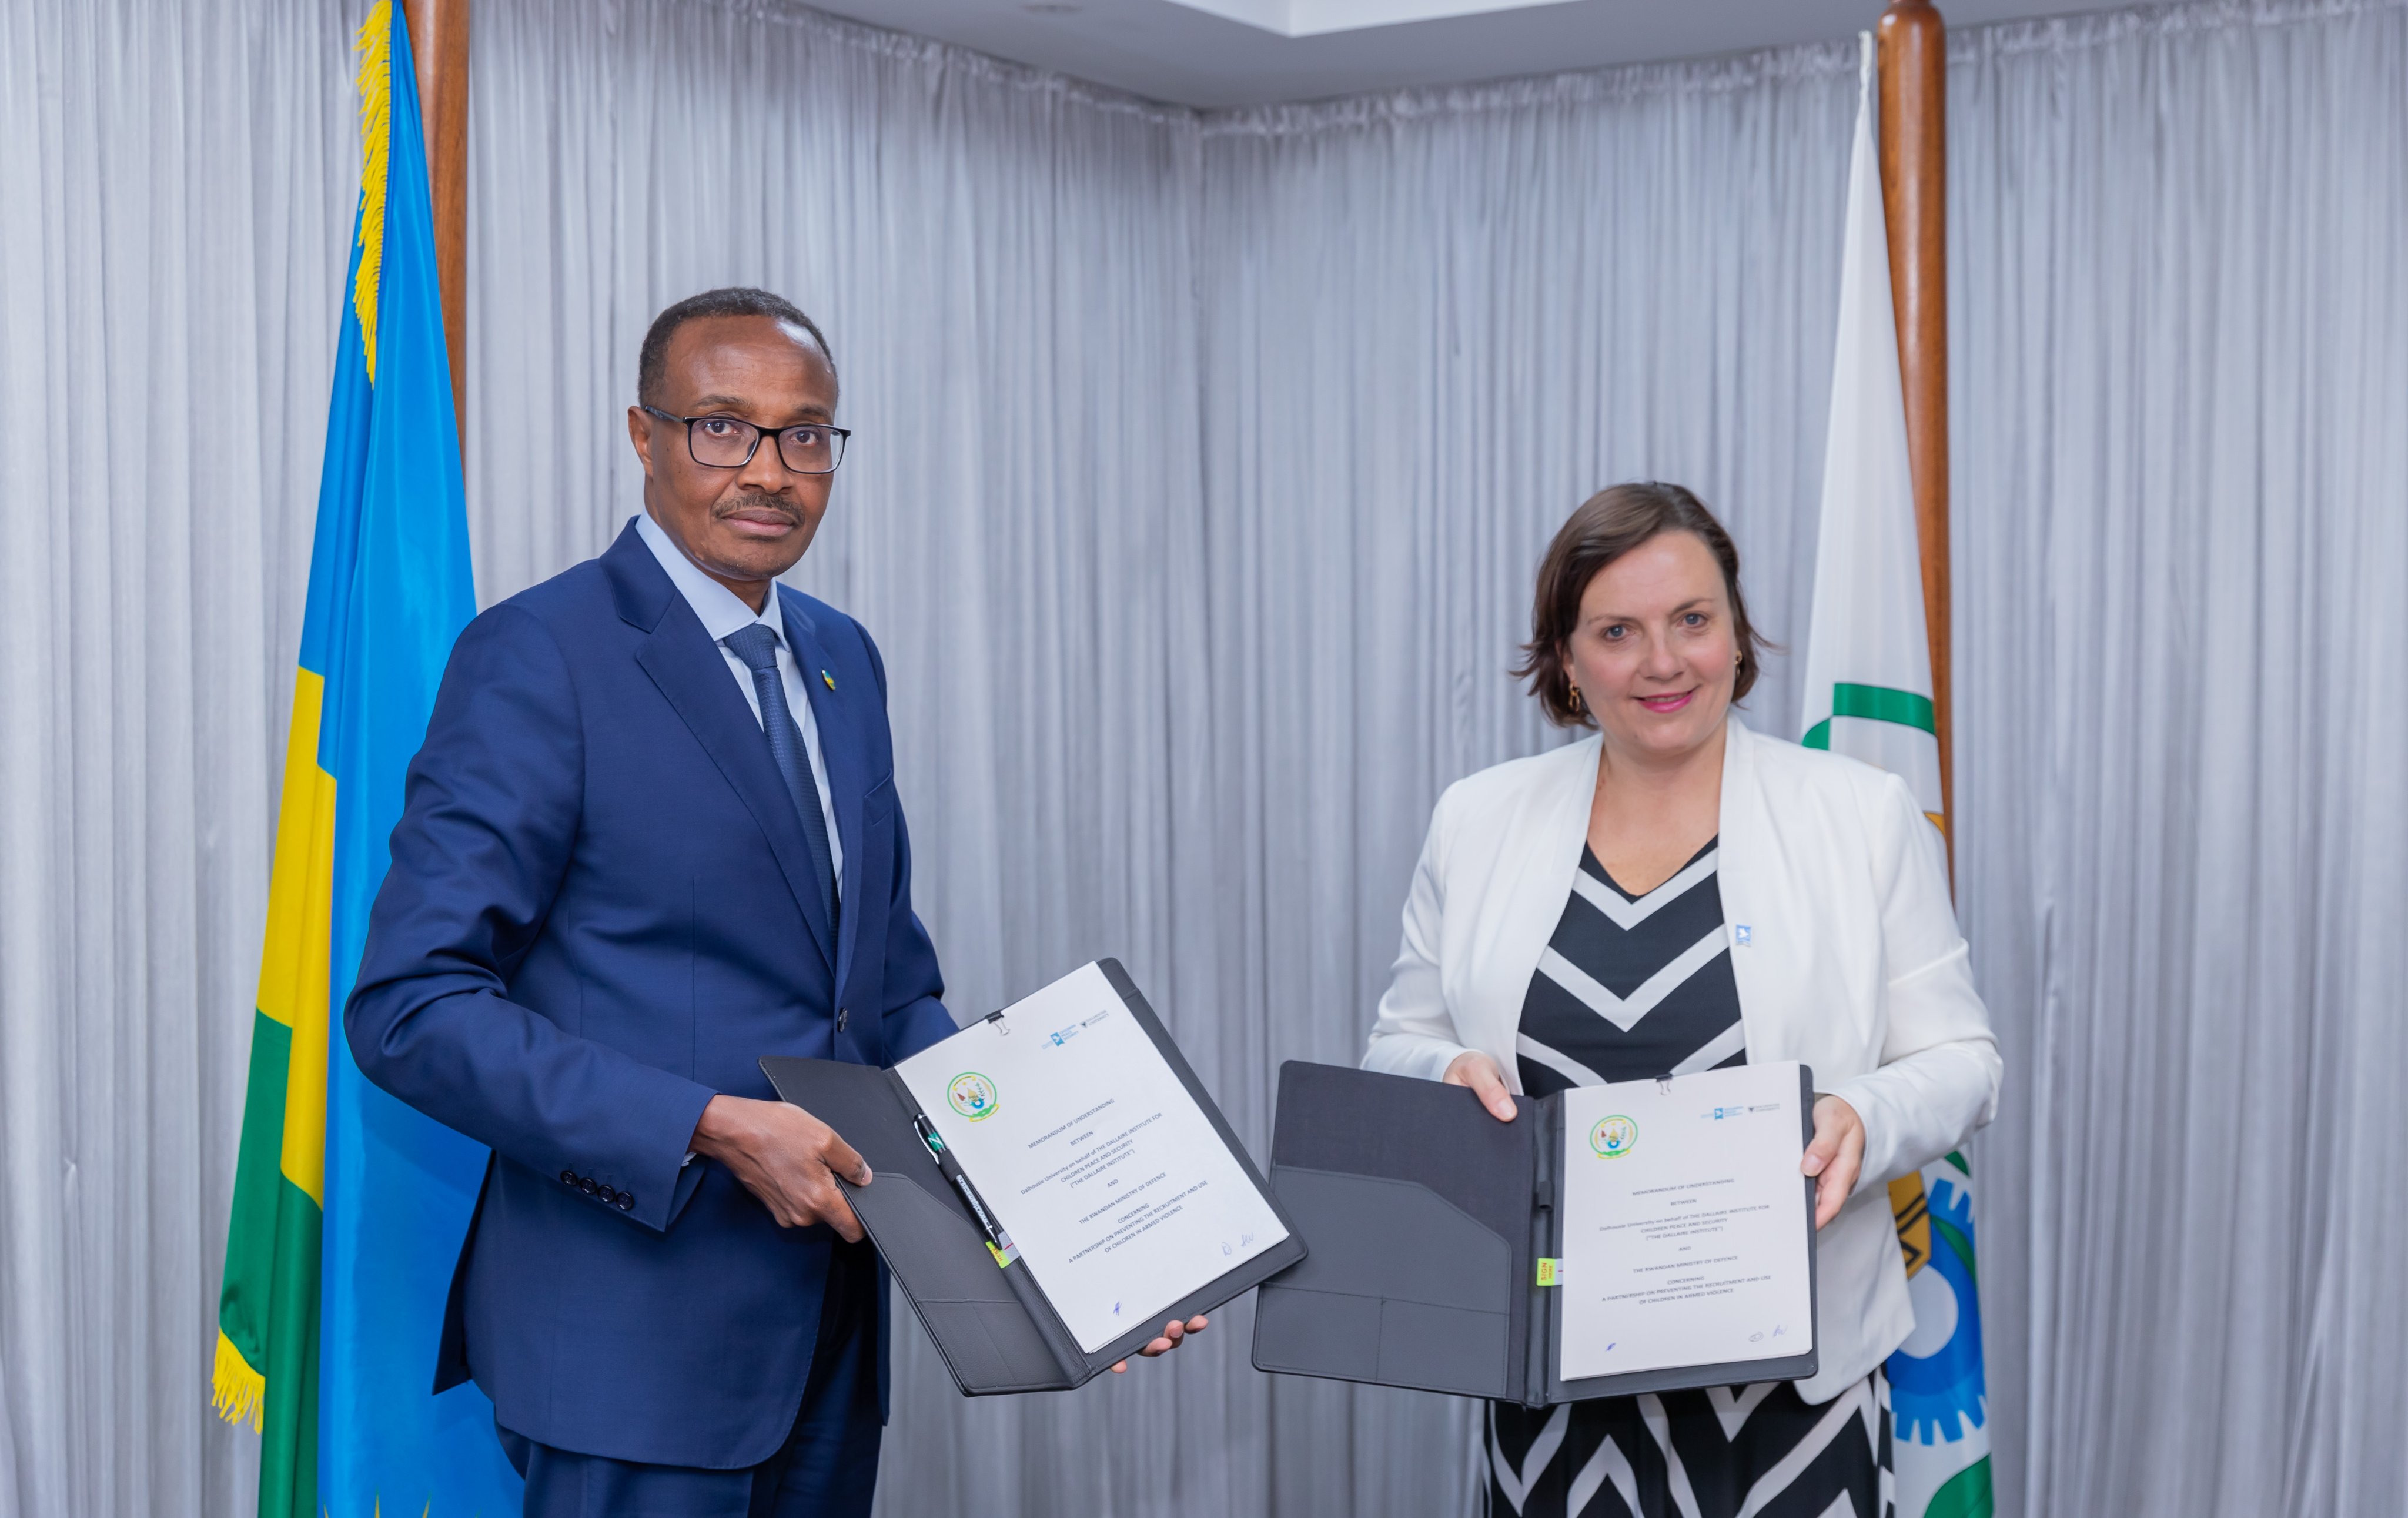 Minister of Defence, Maj Gen Albert Murasira and Shelly Whitman, the Executive Director of the Dallaire Institute for Children, Peace and Security during the signing ceremony in Kigali on June 13.Courtesy